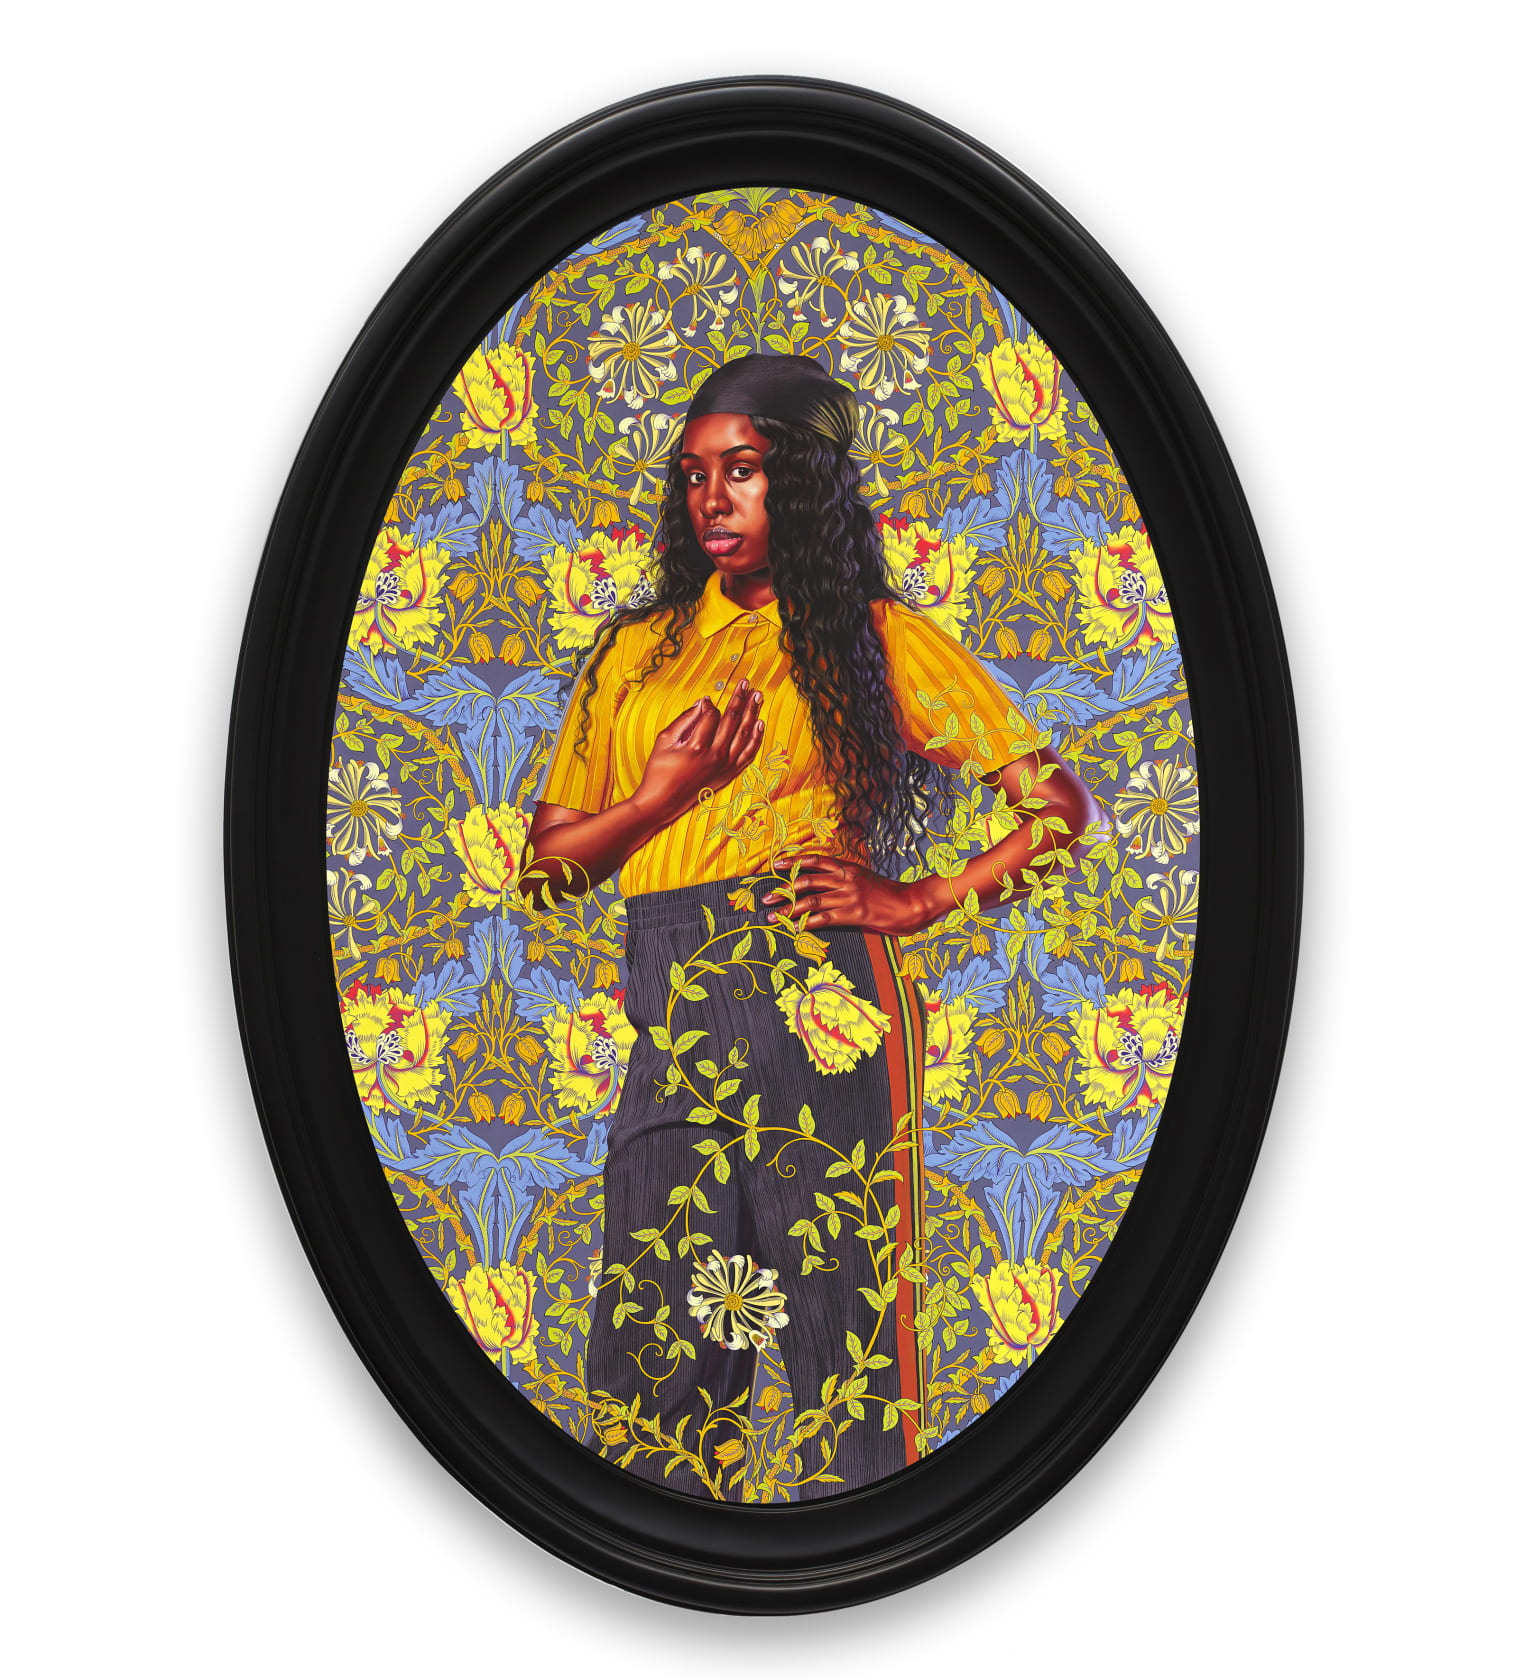 Kehinde Wiley | The Yellow Wallpaper, William Morrison Gallery, London, England February 22 - July 12 2020 | 4